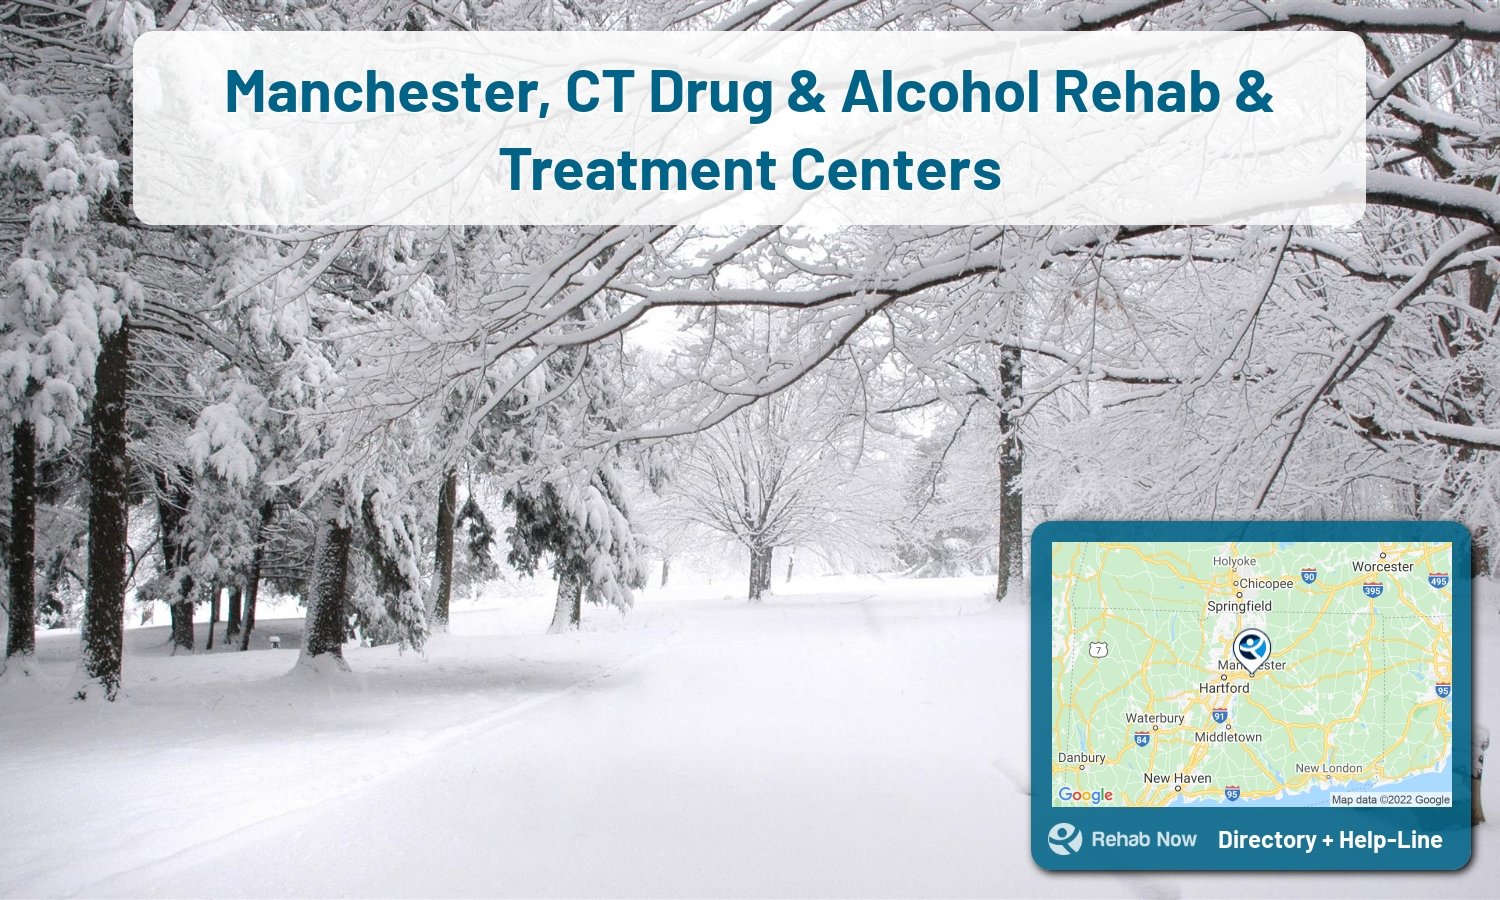 View options, availability, treatment methods, and more, for drug rehab and alcohol treatment in Manchester, Connecticut